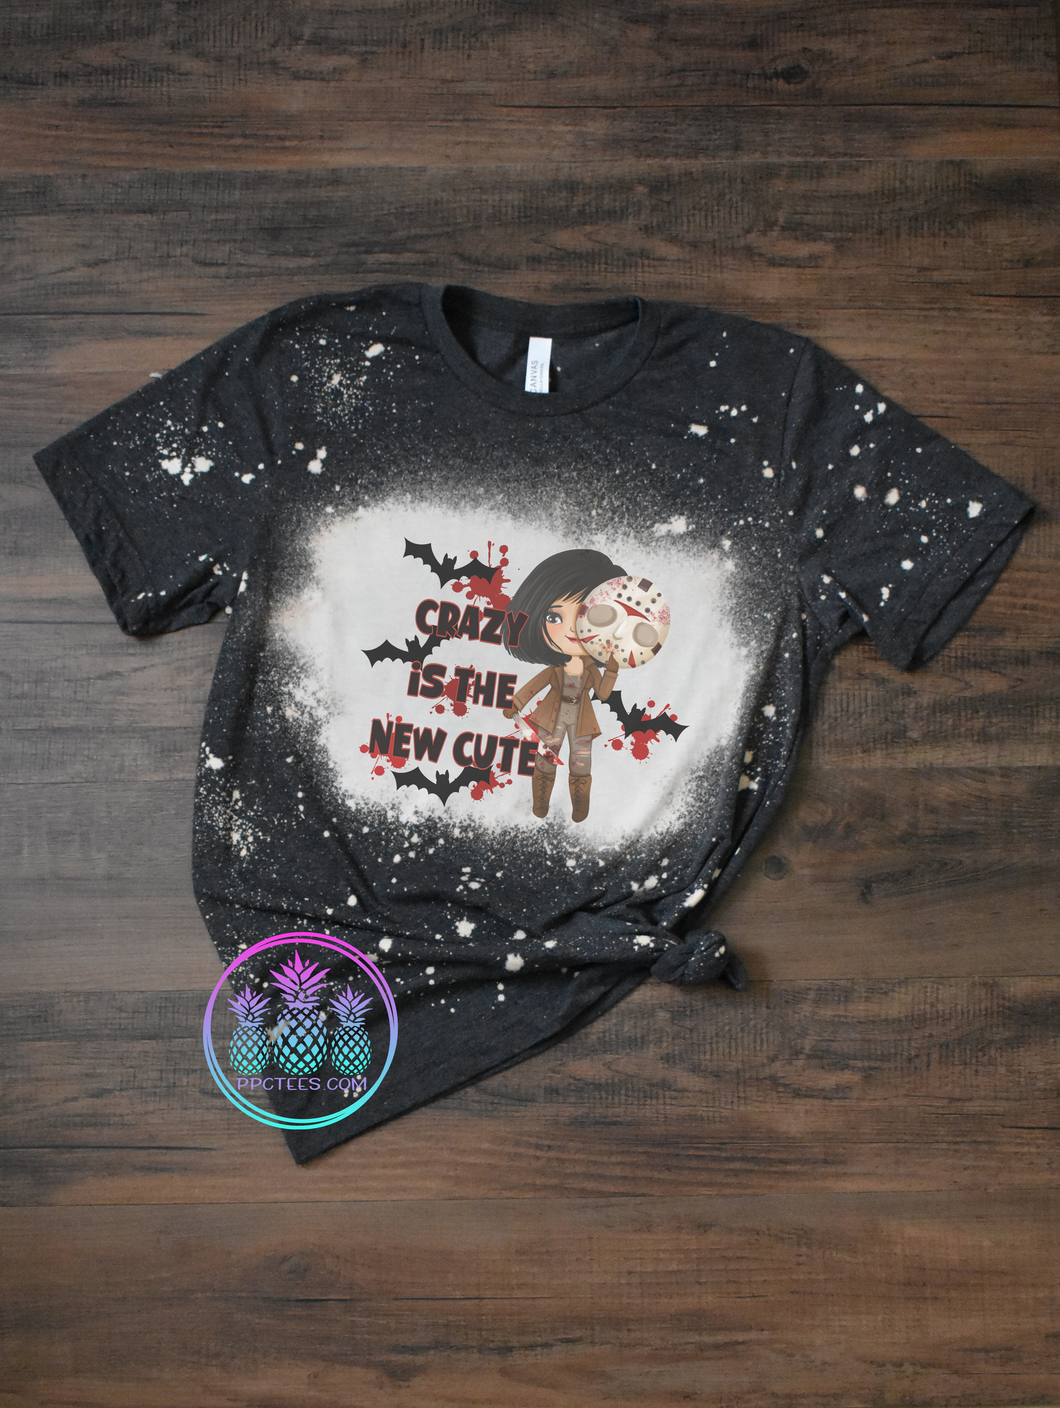 Crazy is the New Cute Sublimation Shirt